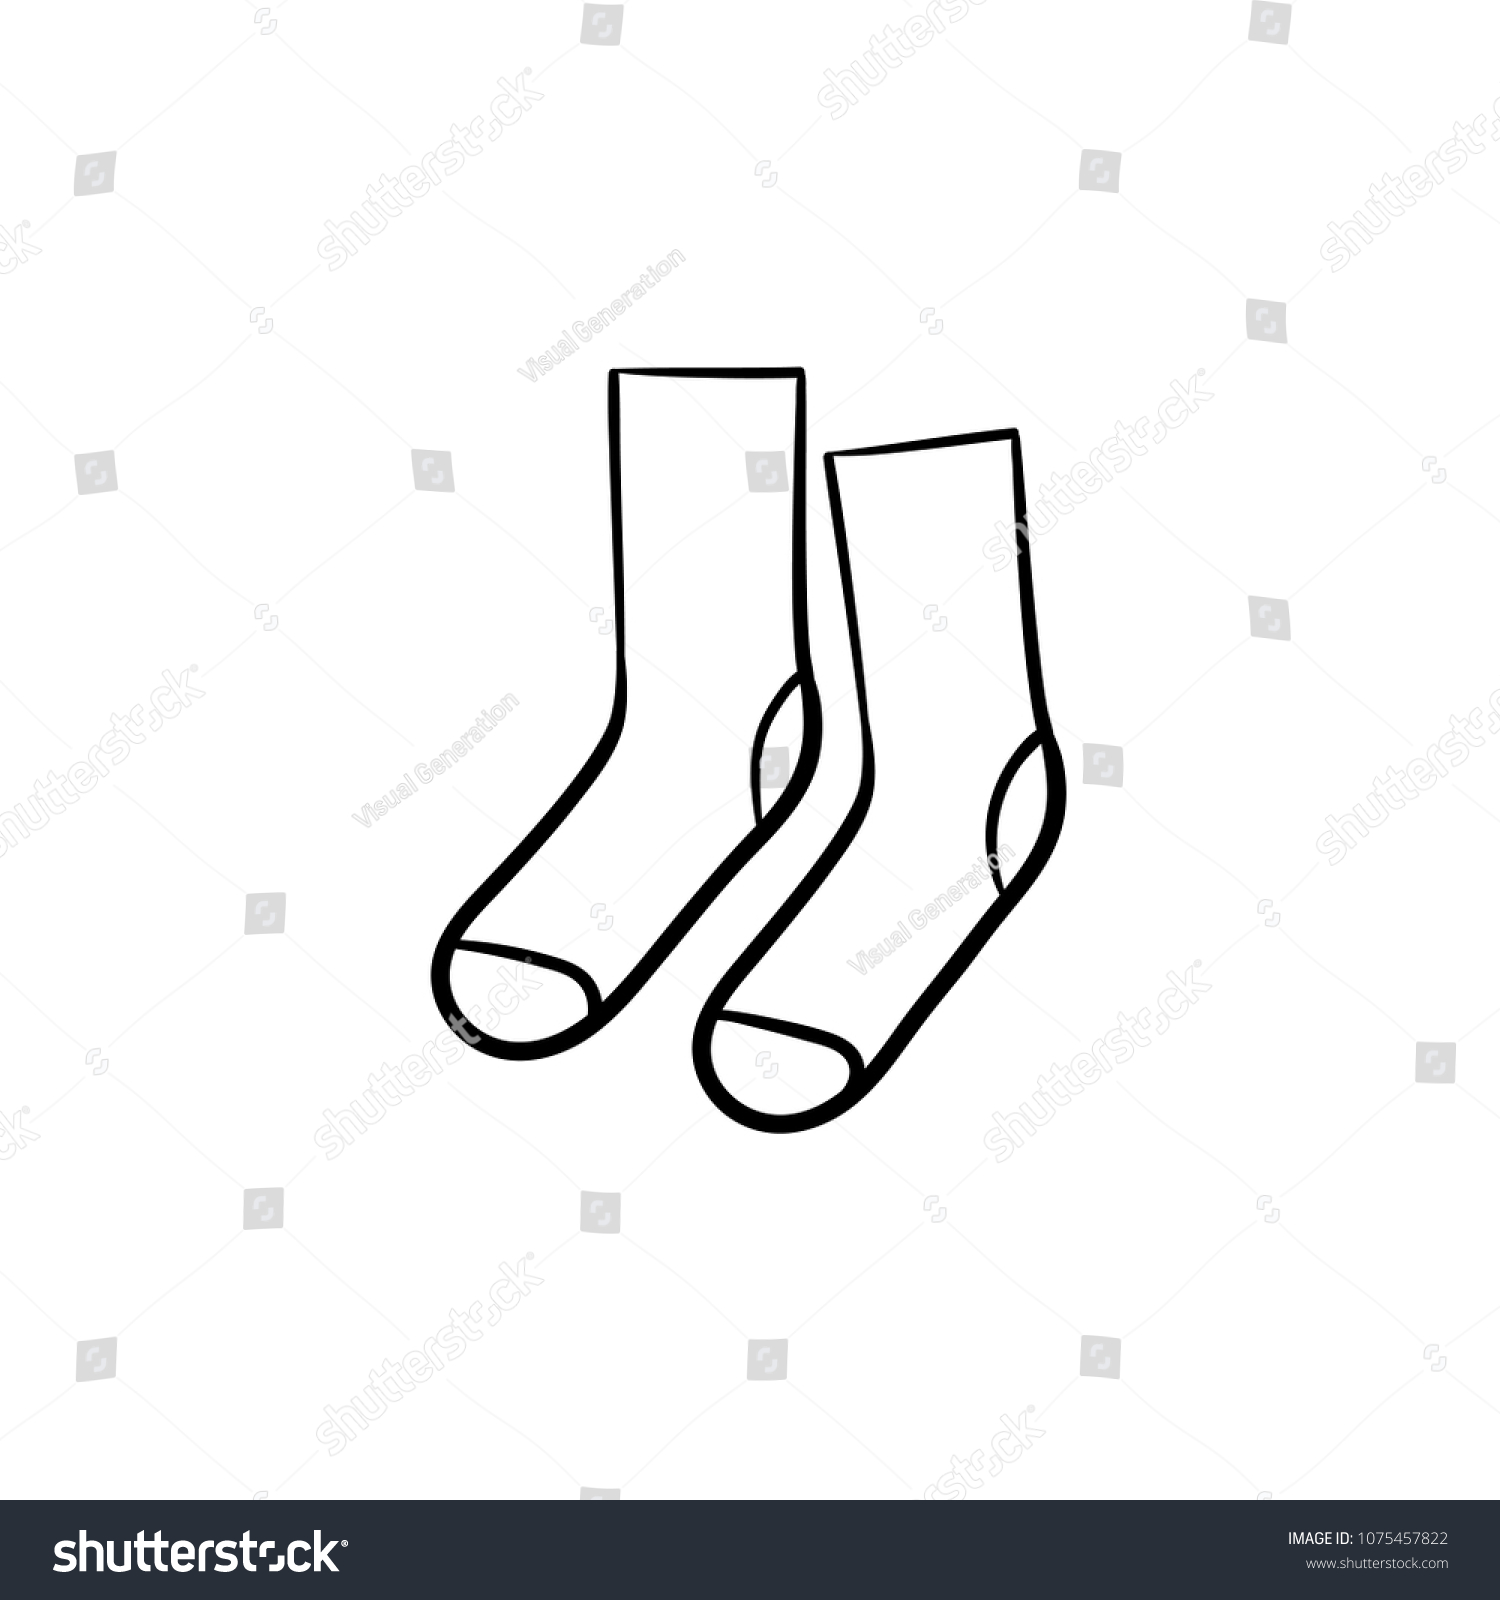 Socks Hand Drawn Outline Doodle Icon Stock Vector (Royalty Free ...